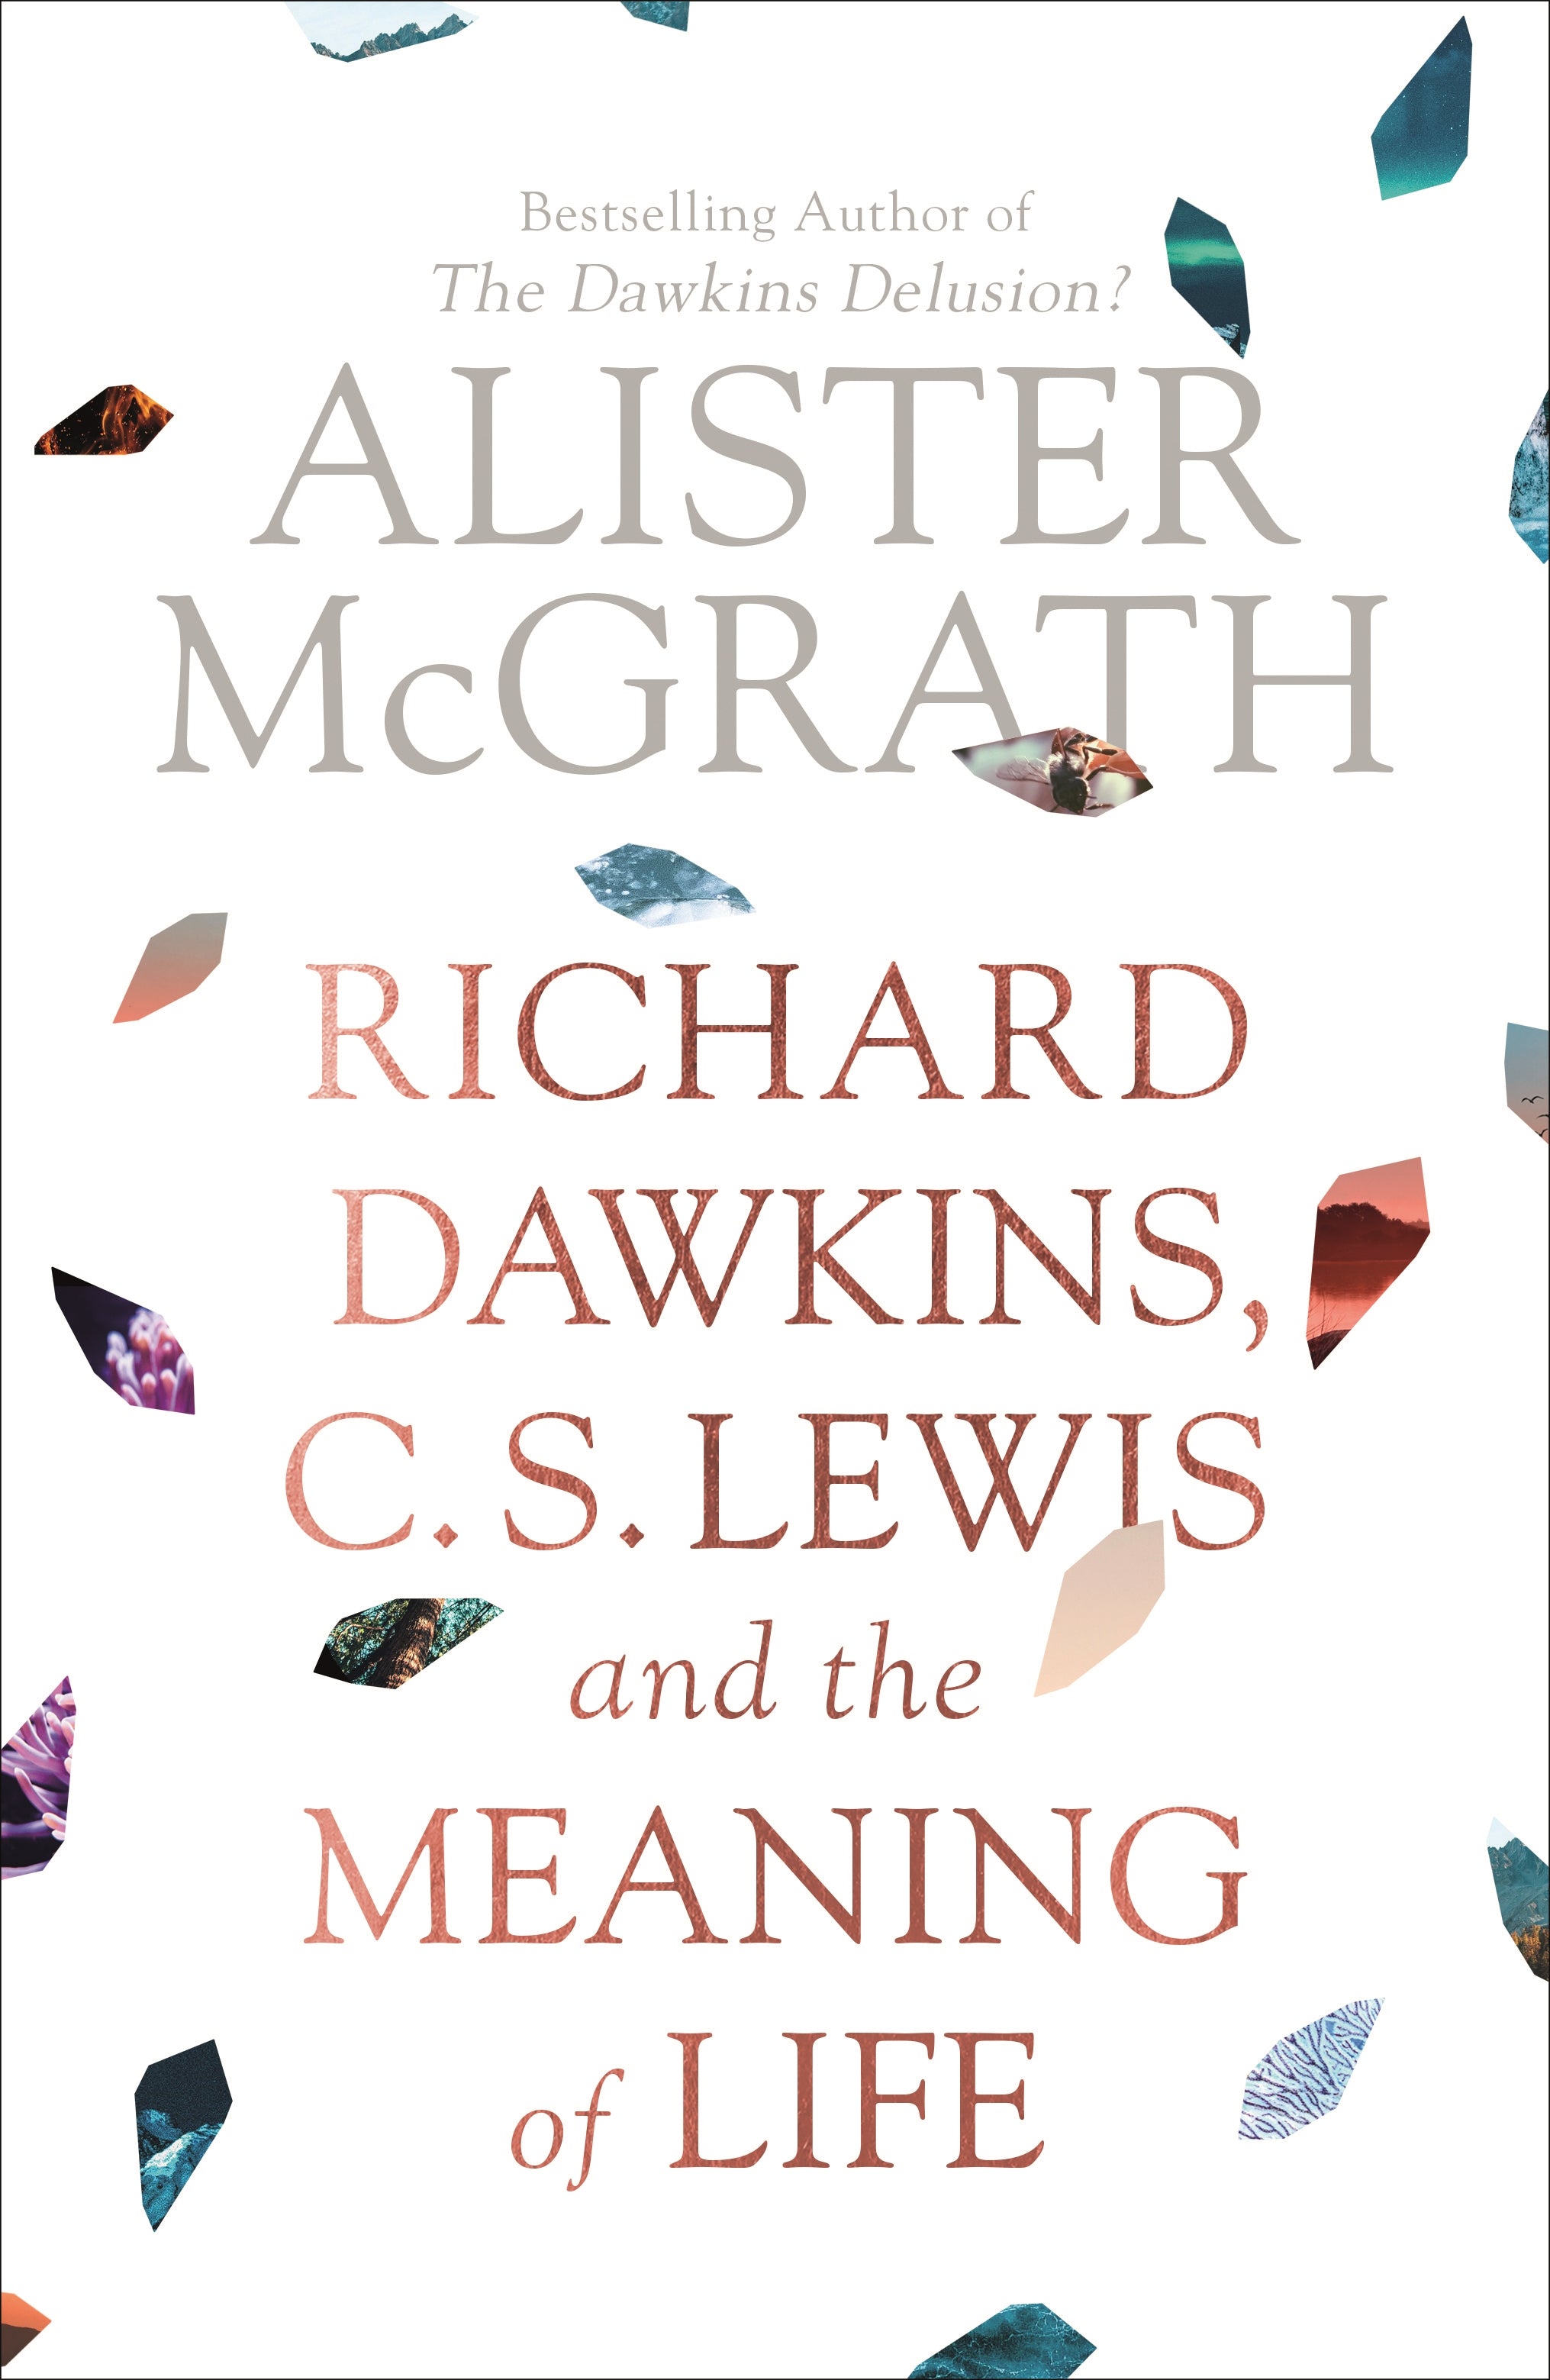 Image of Richard Dawkins, C. S. Lewis and the Meaning of Life other